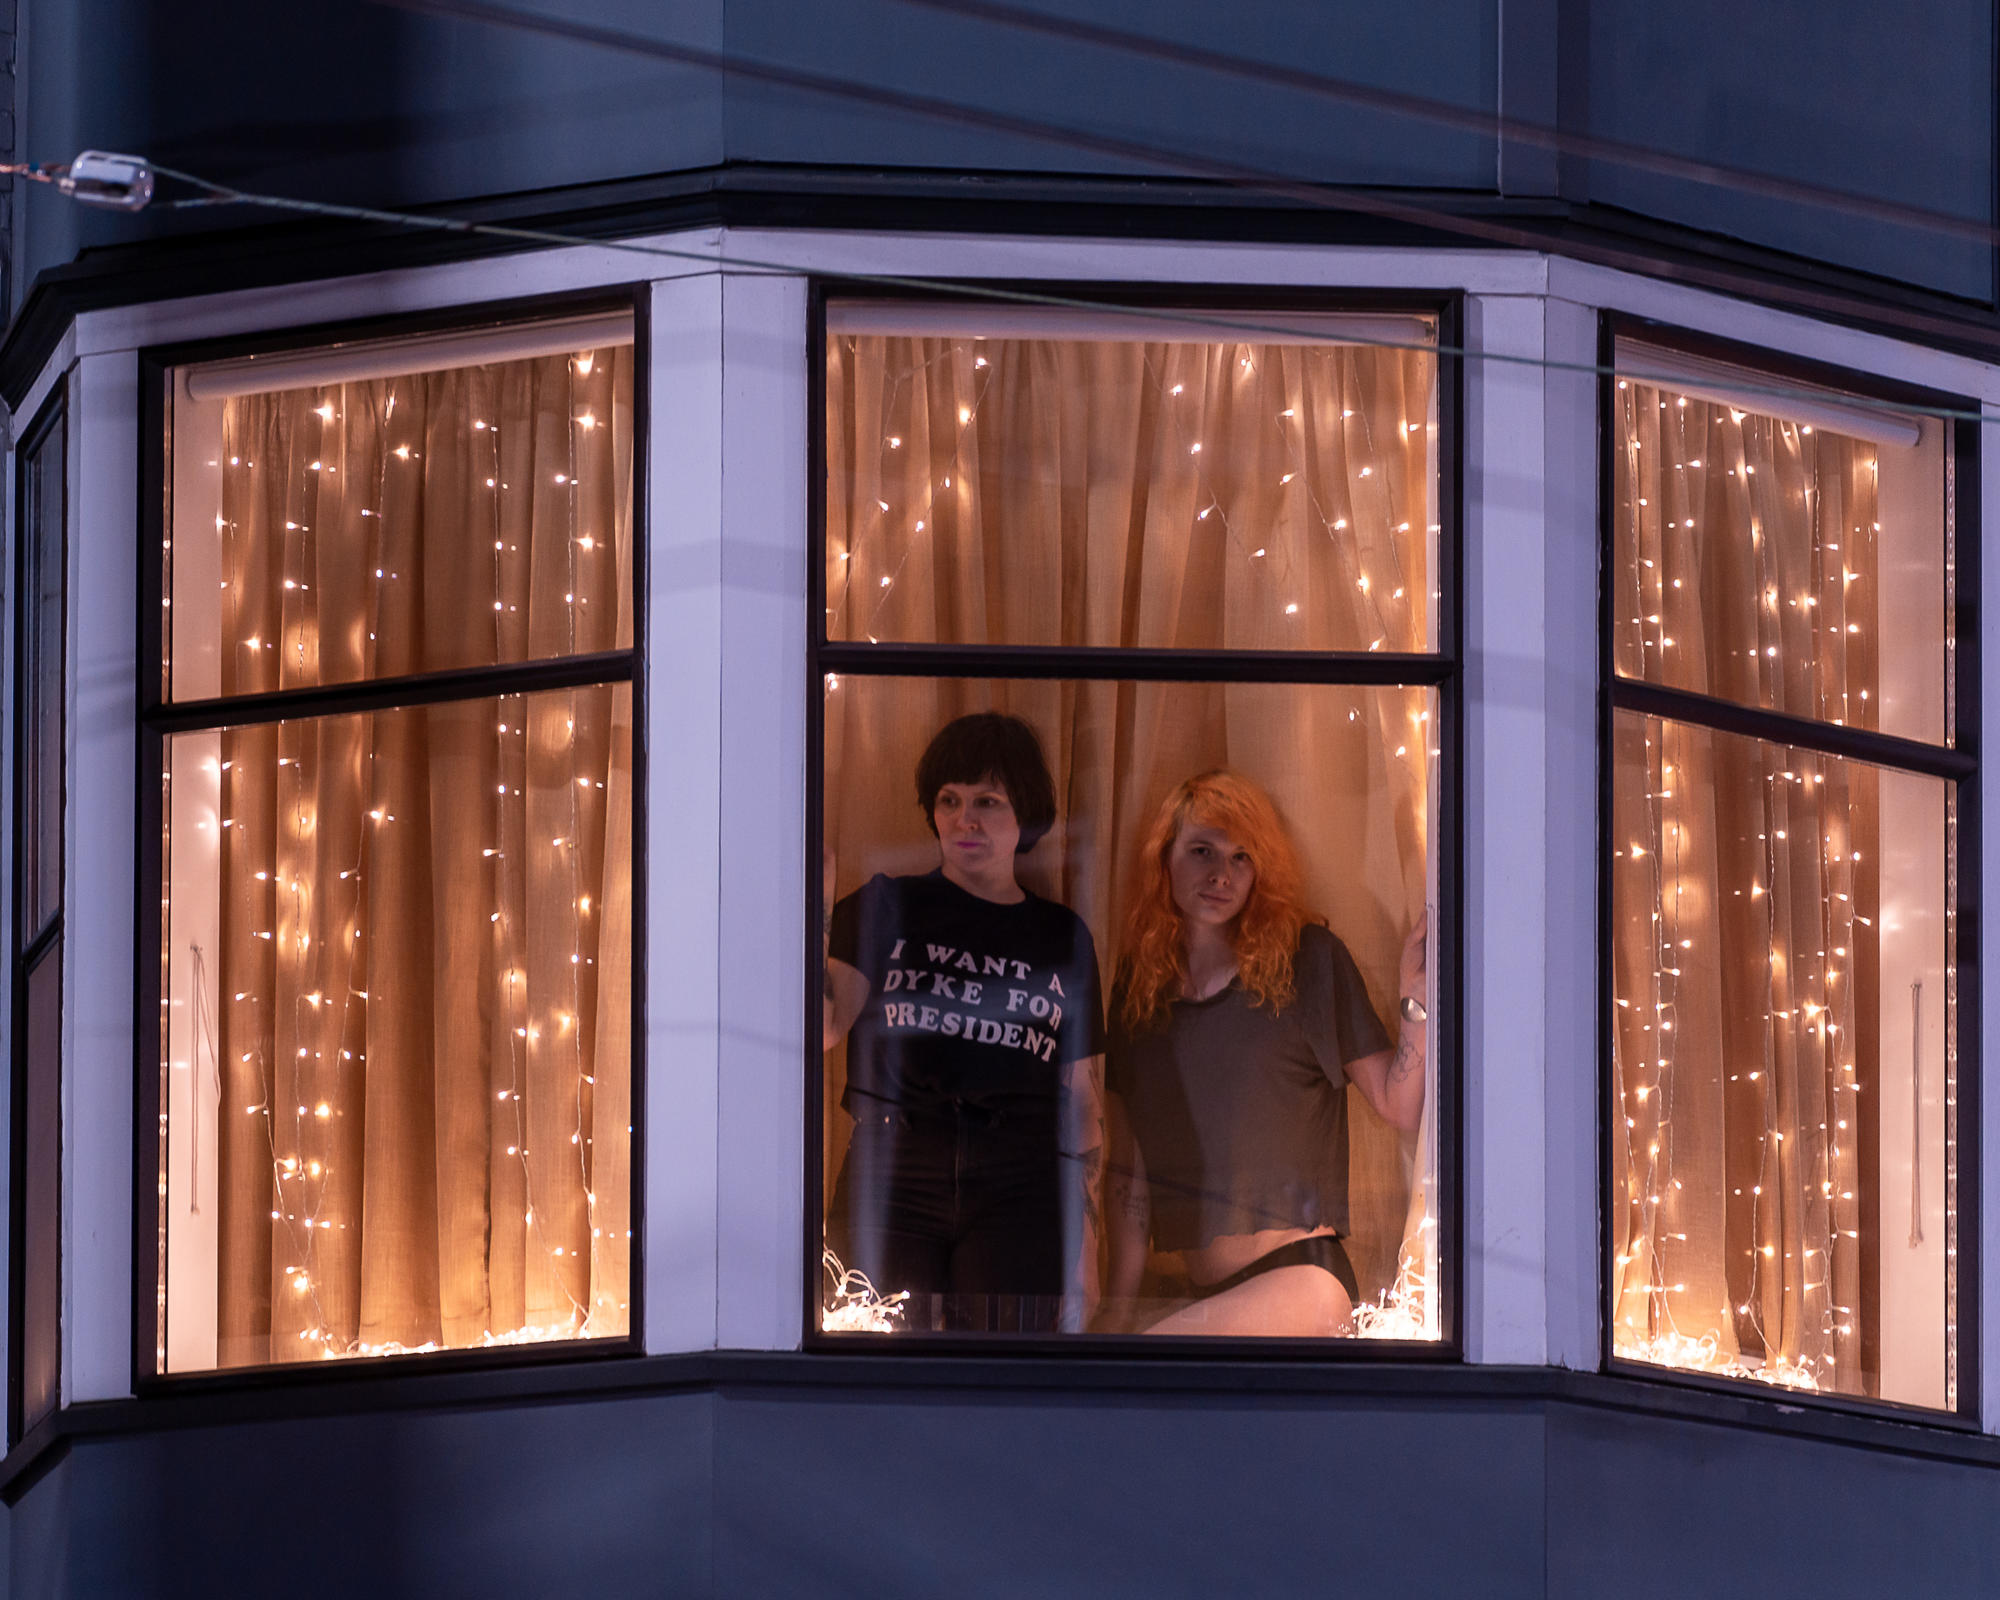 Two people in their window, one wearing a T-shirt that says "I want a dyke for president."